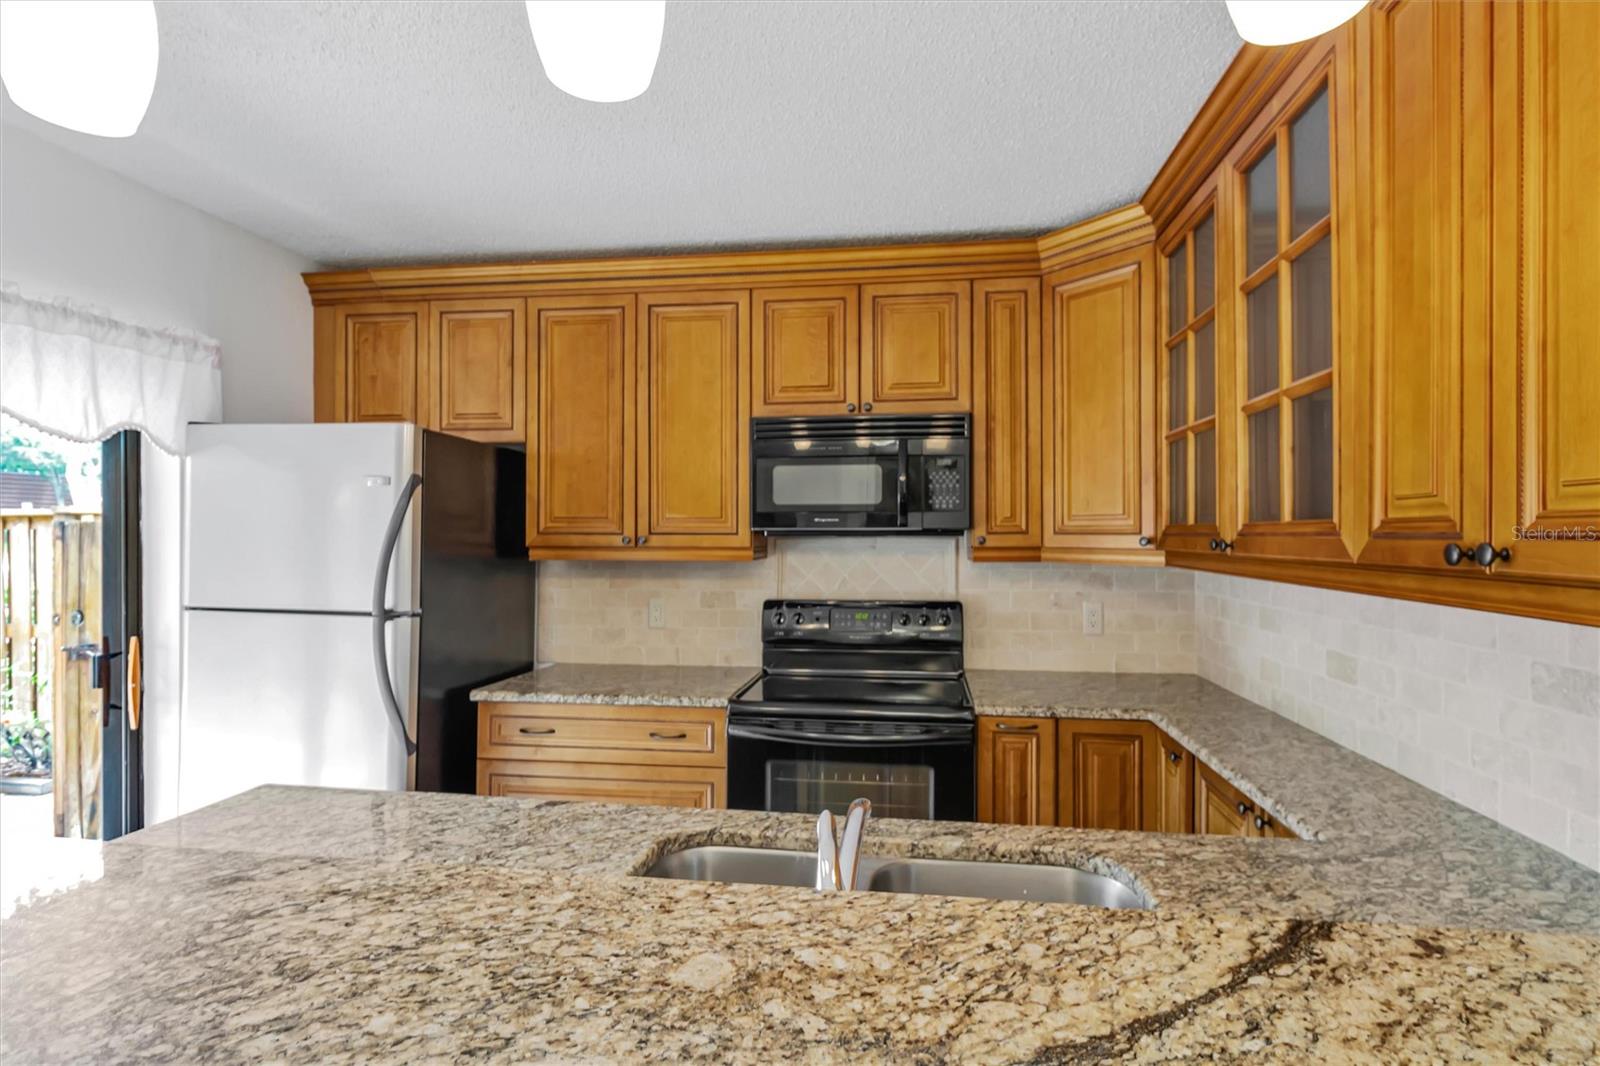 Granite countertops, newer extended cabinets and breakfast bar